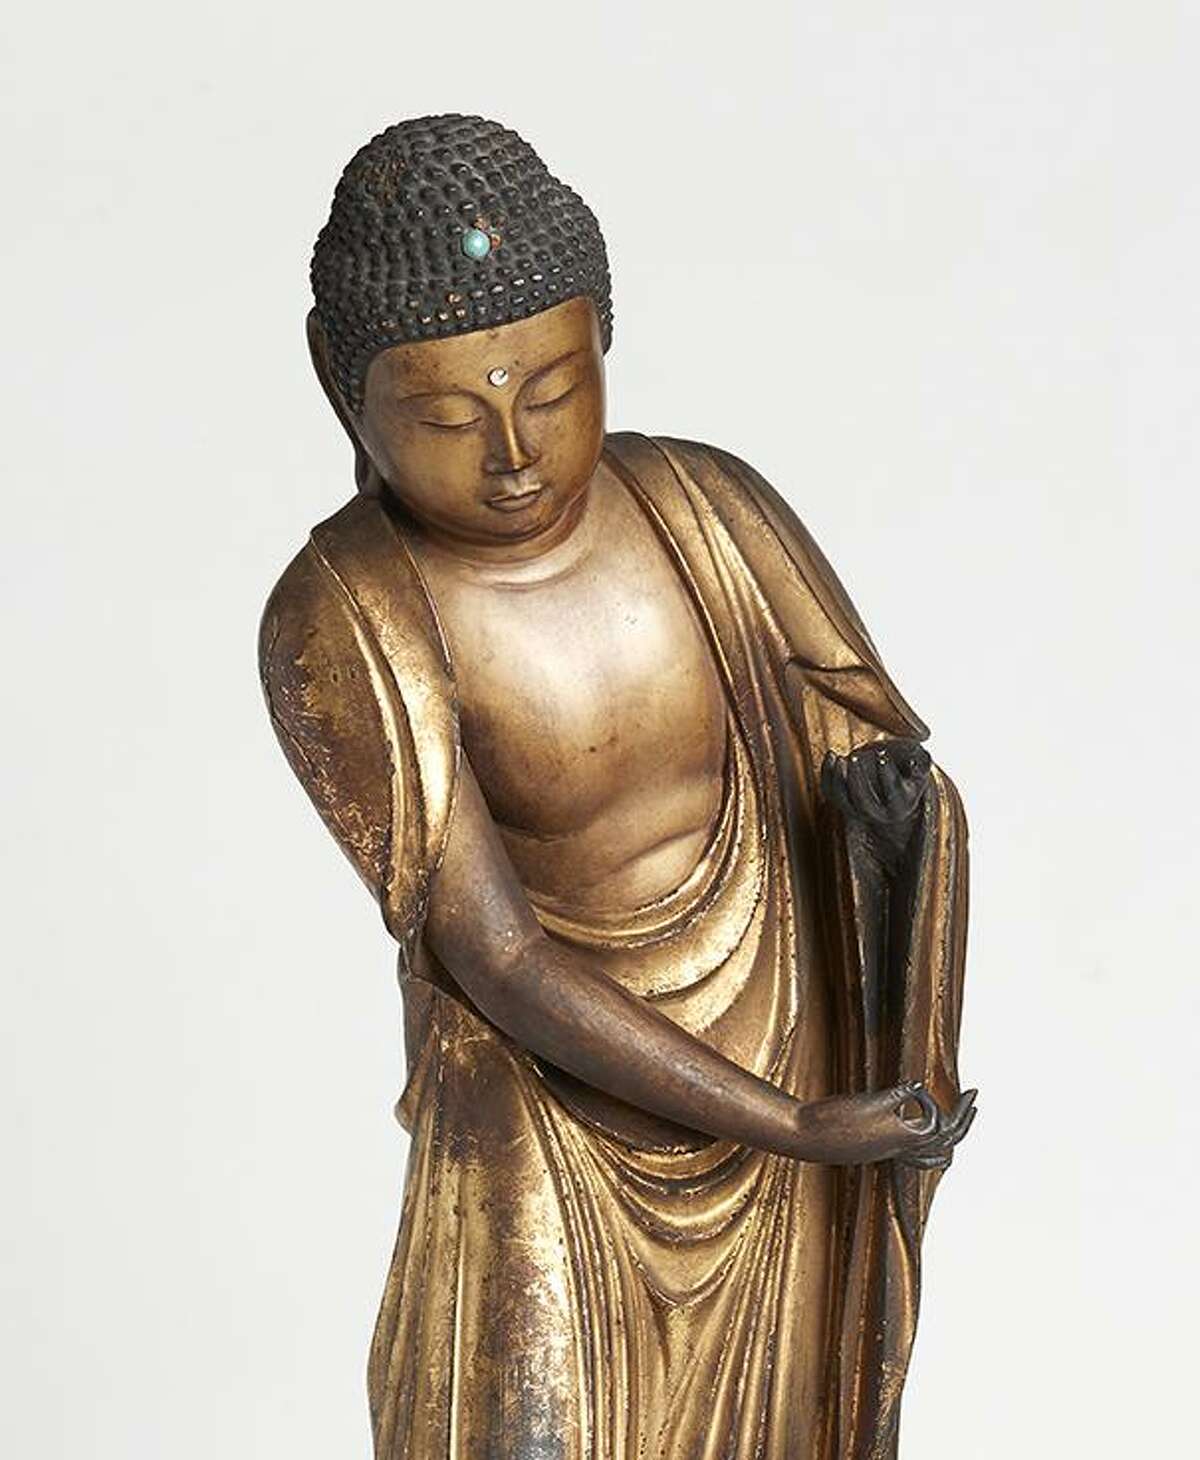 "Bowing Buddha," a gilt wood sculpture from the 17-18th century, is one of the works from Japan in "Heaven and Hell: Salvation and Retribution in Pure Land Buddhism." The exhibit at the San Antonio Museum of Art also features artworks from other countries, including Afghanistan, China and Korea.